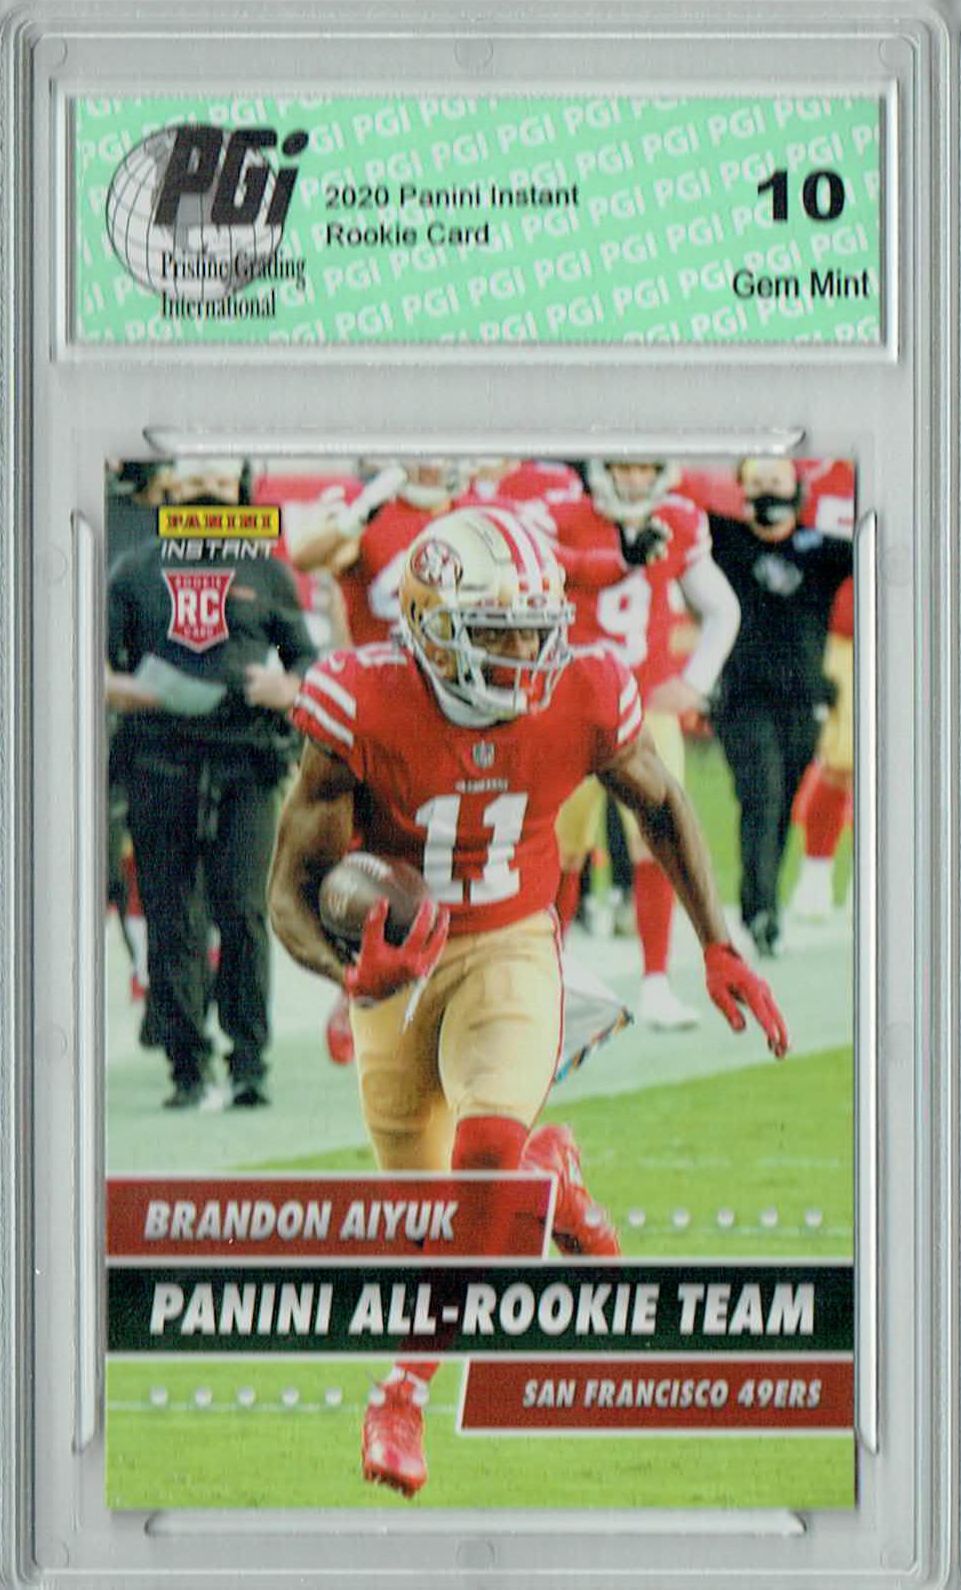 2020 BRANDON AIYUK GOES AIRBORNE FOR TOUCHDOWN PANINI INSTANT 49ers NFL CARD  #60